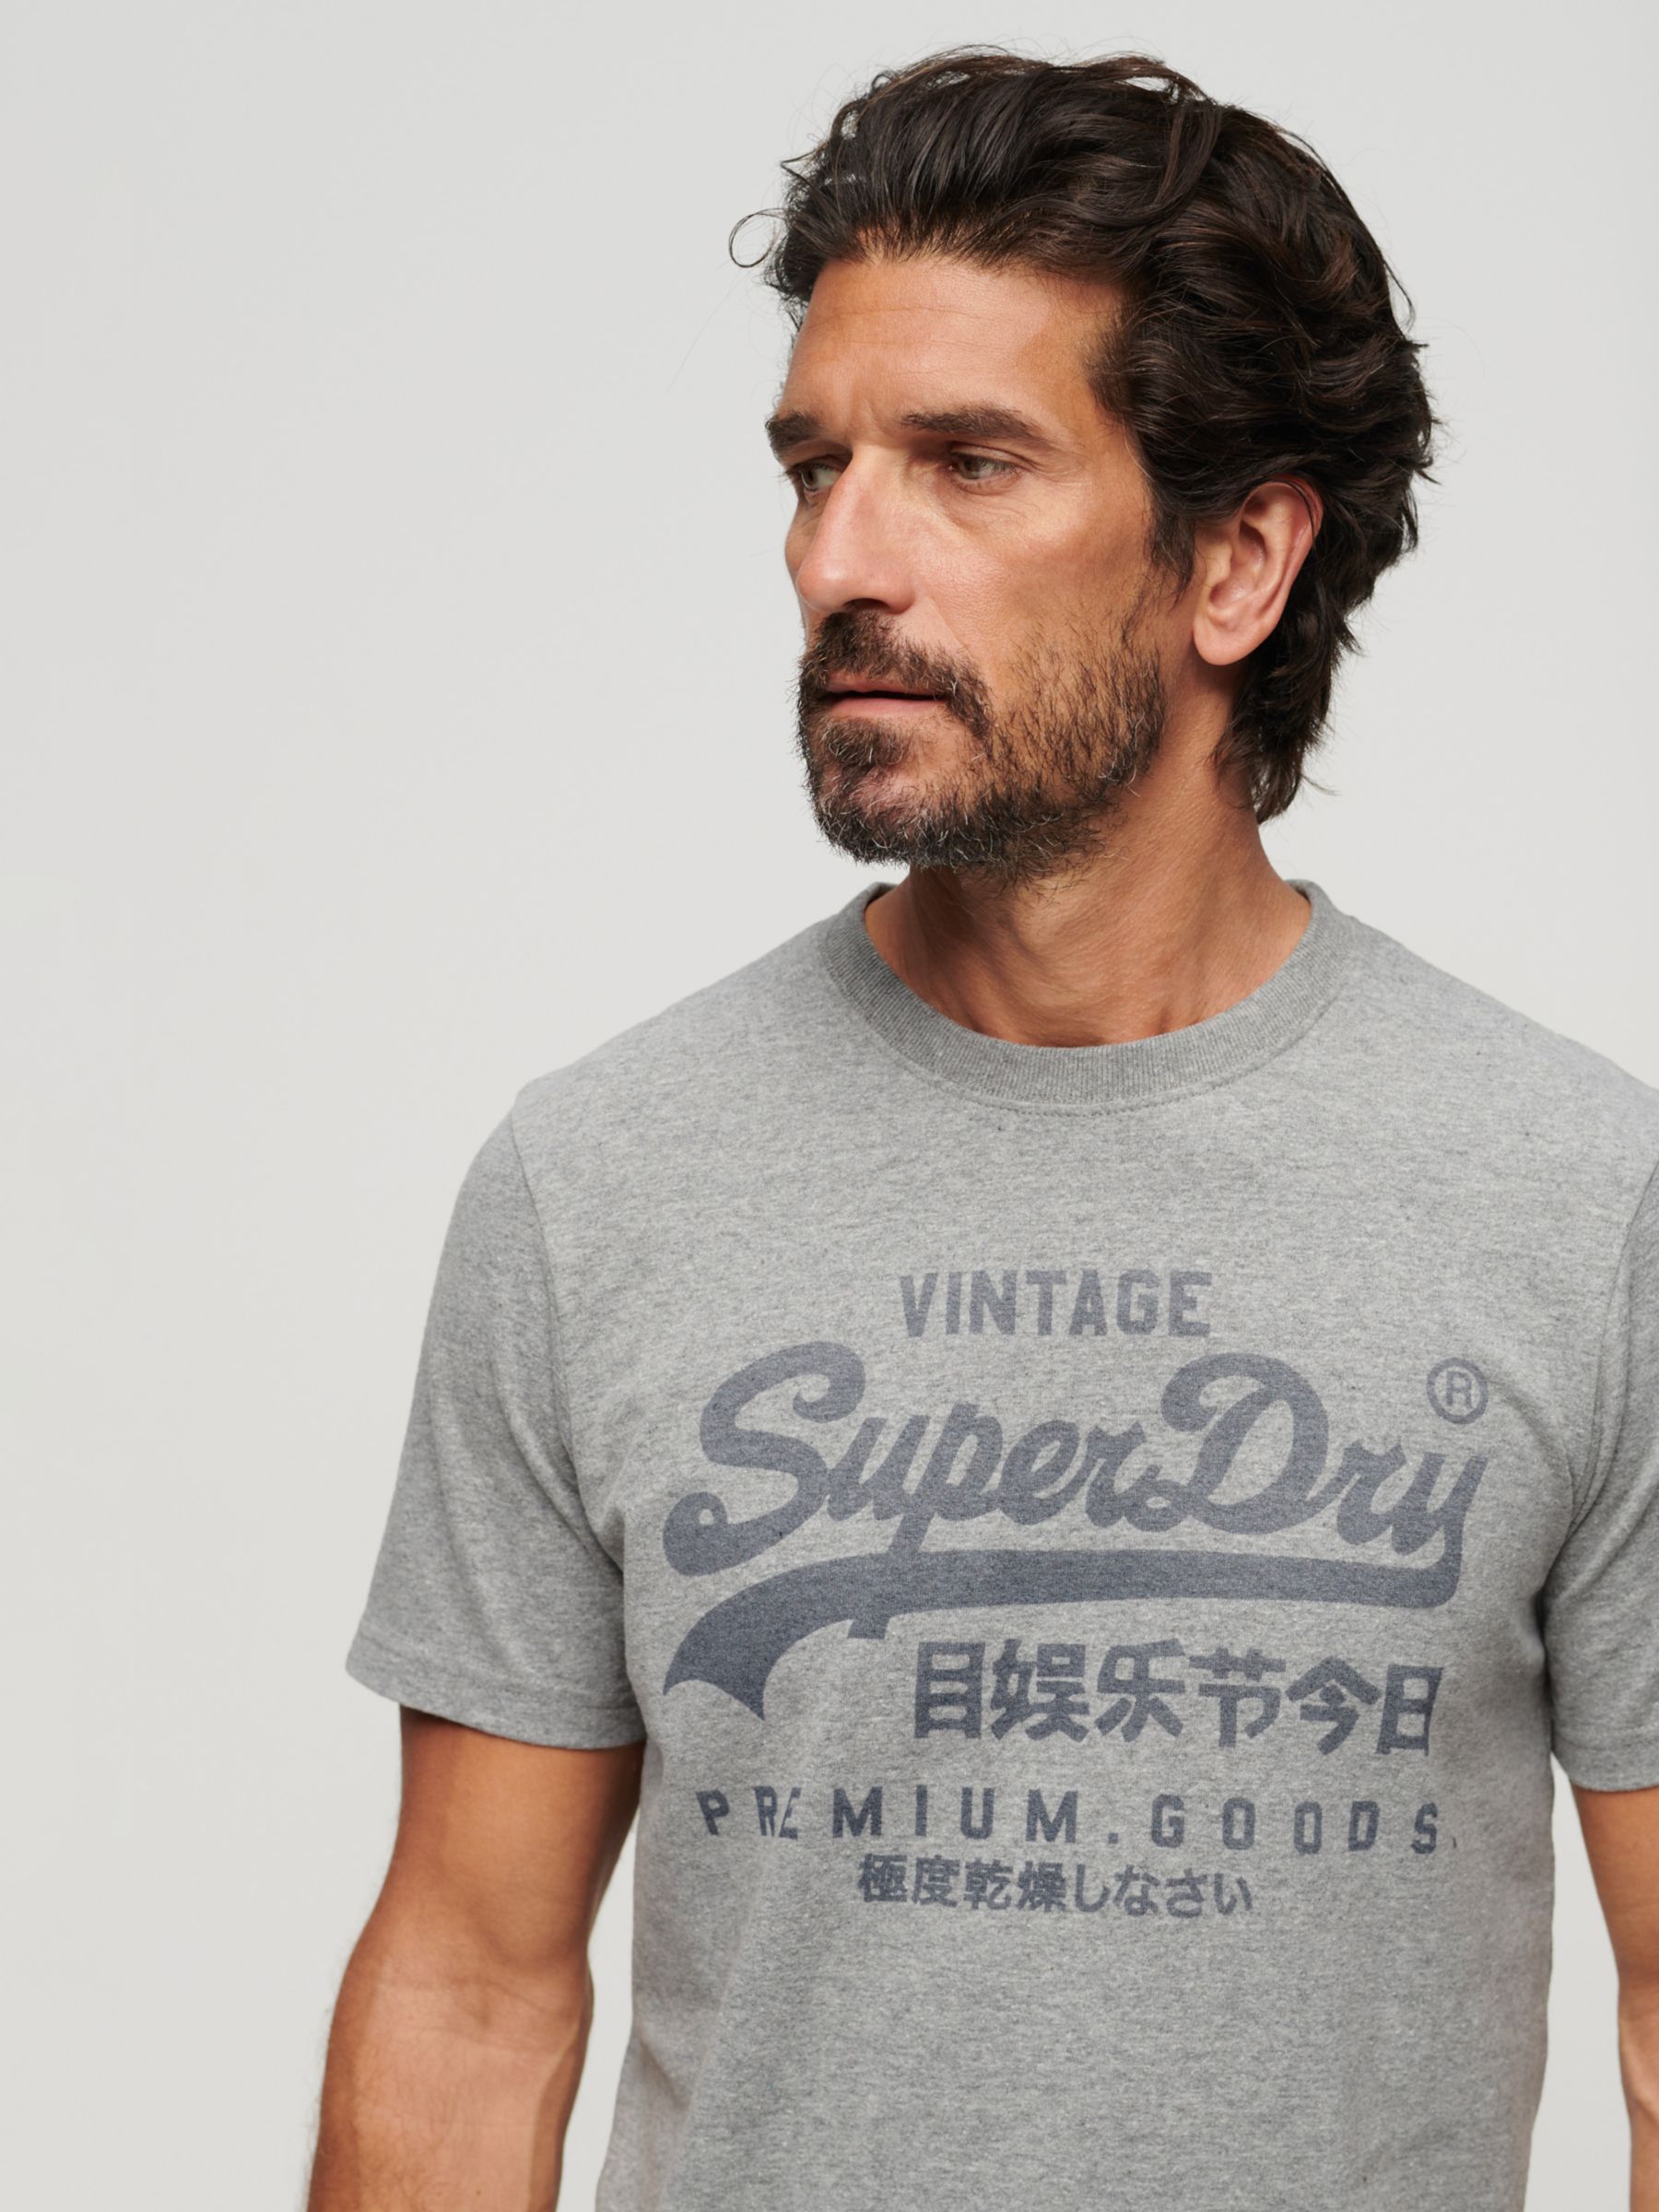 Buy Superdry Classic Heritage T-Shirt Online at johnlewis.com